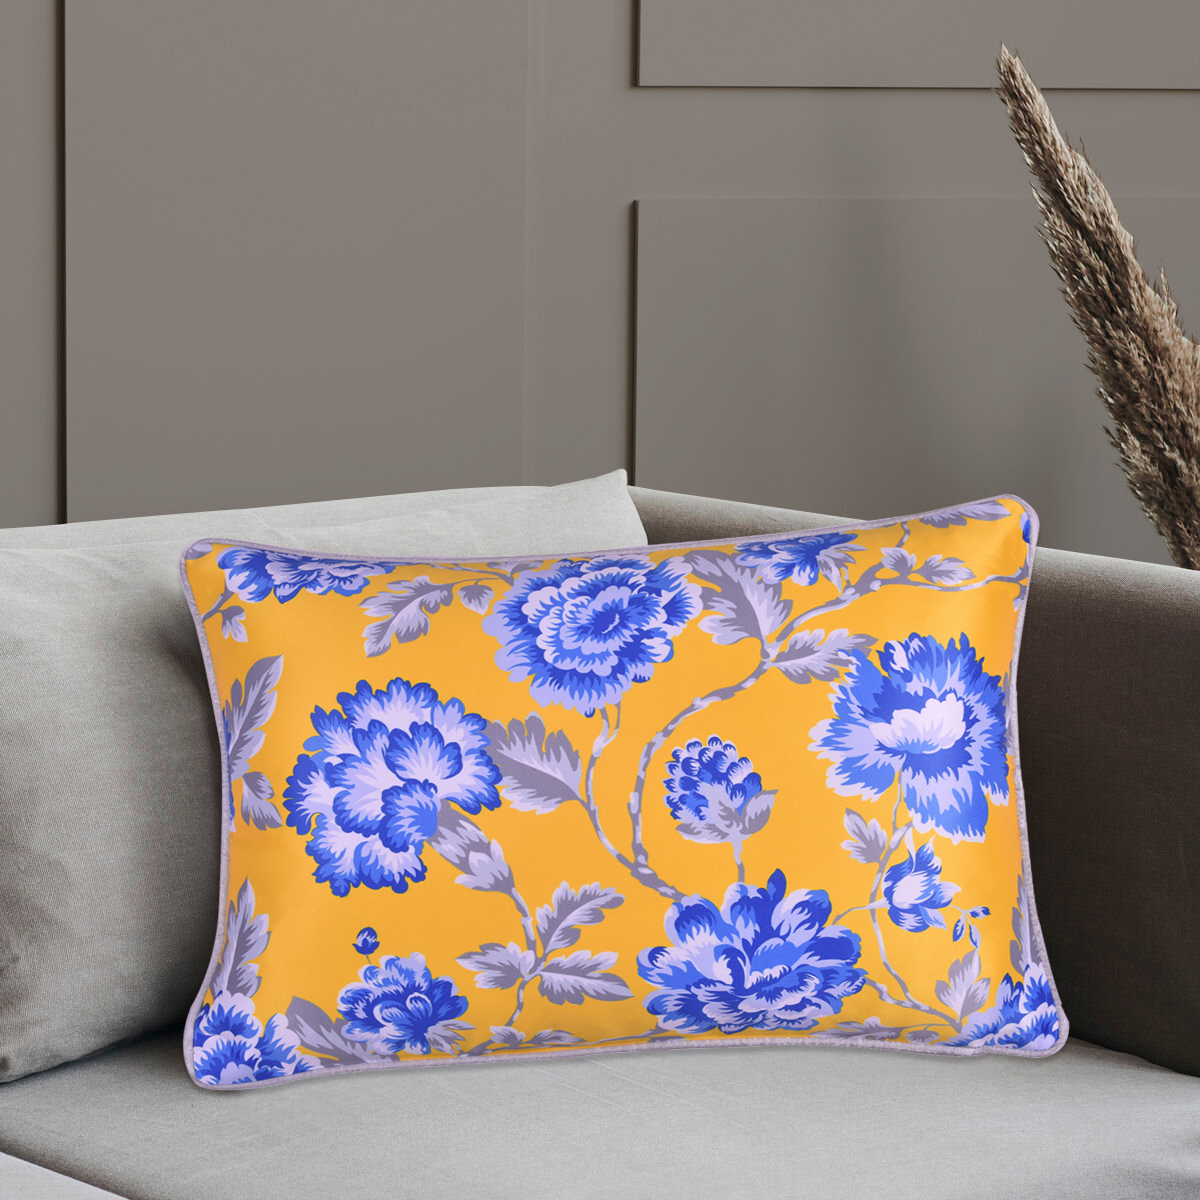 Throw Pillow Covers Set of 4 for Living Room Table, Floral Printed Cushion Case, 14x20 inches - Yellow - Home Decor - image 2 of 14